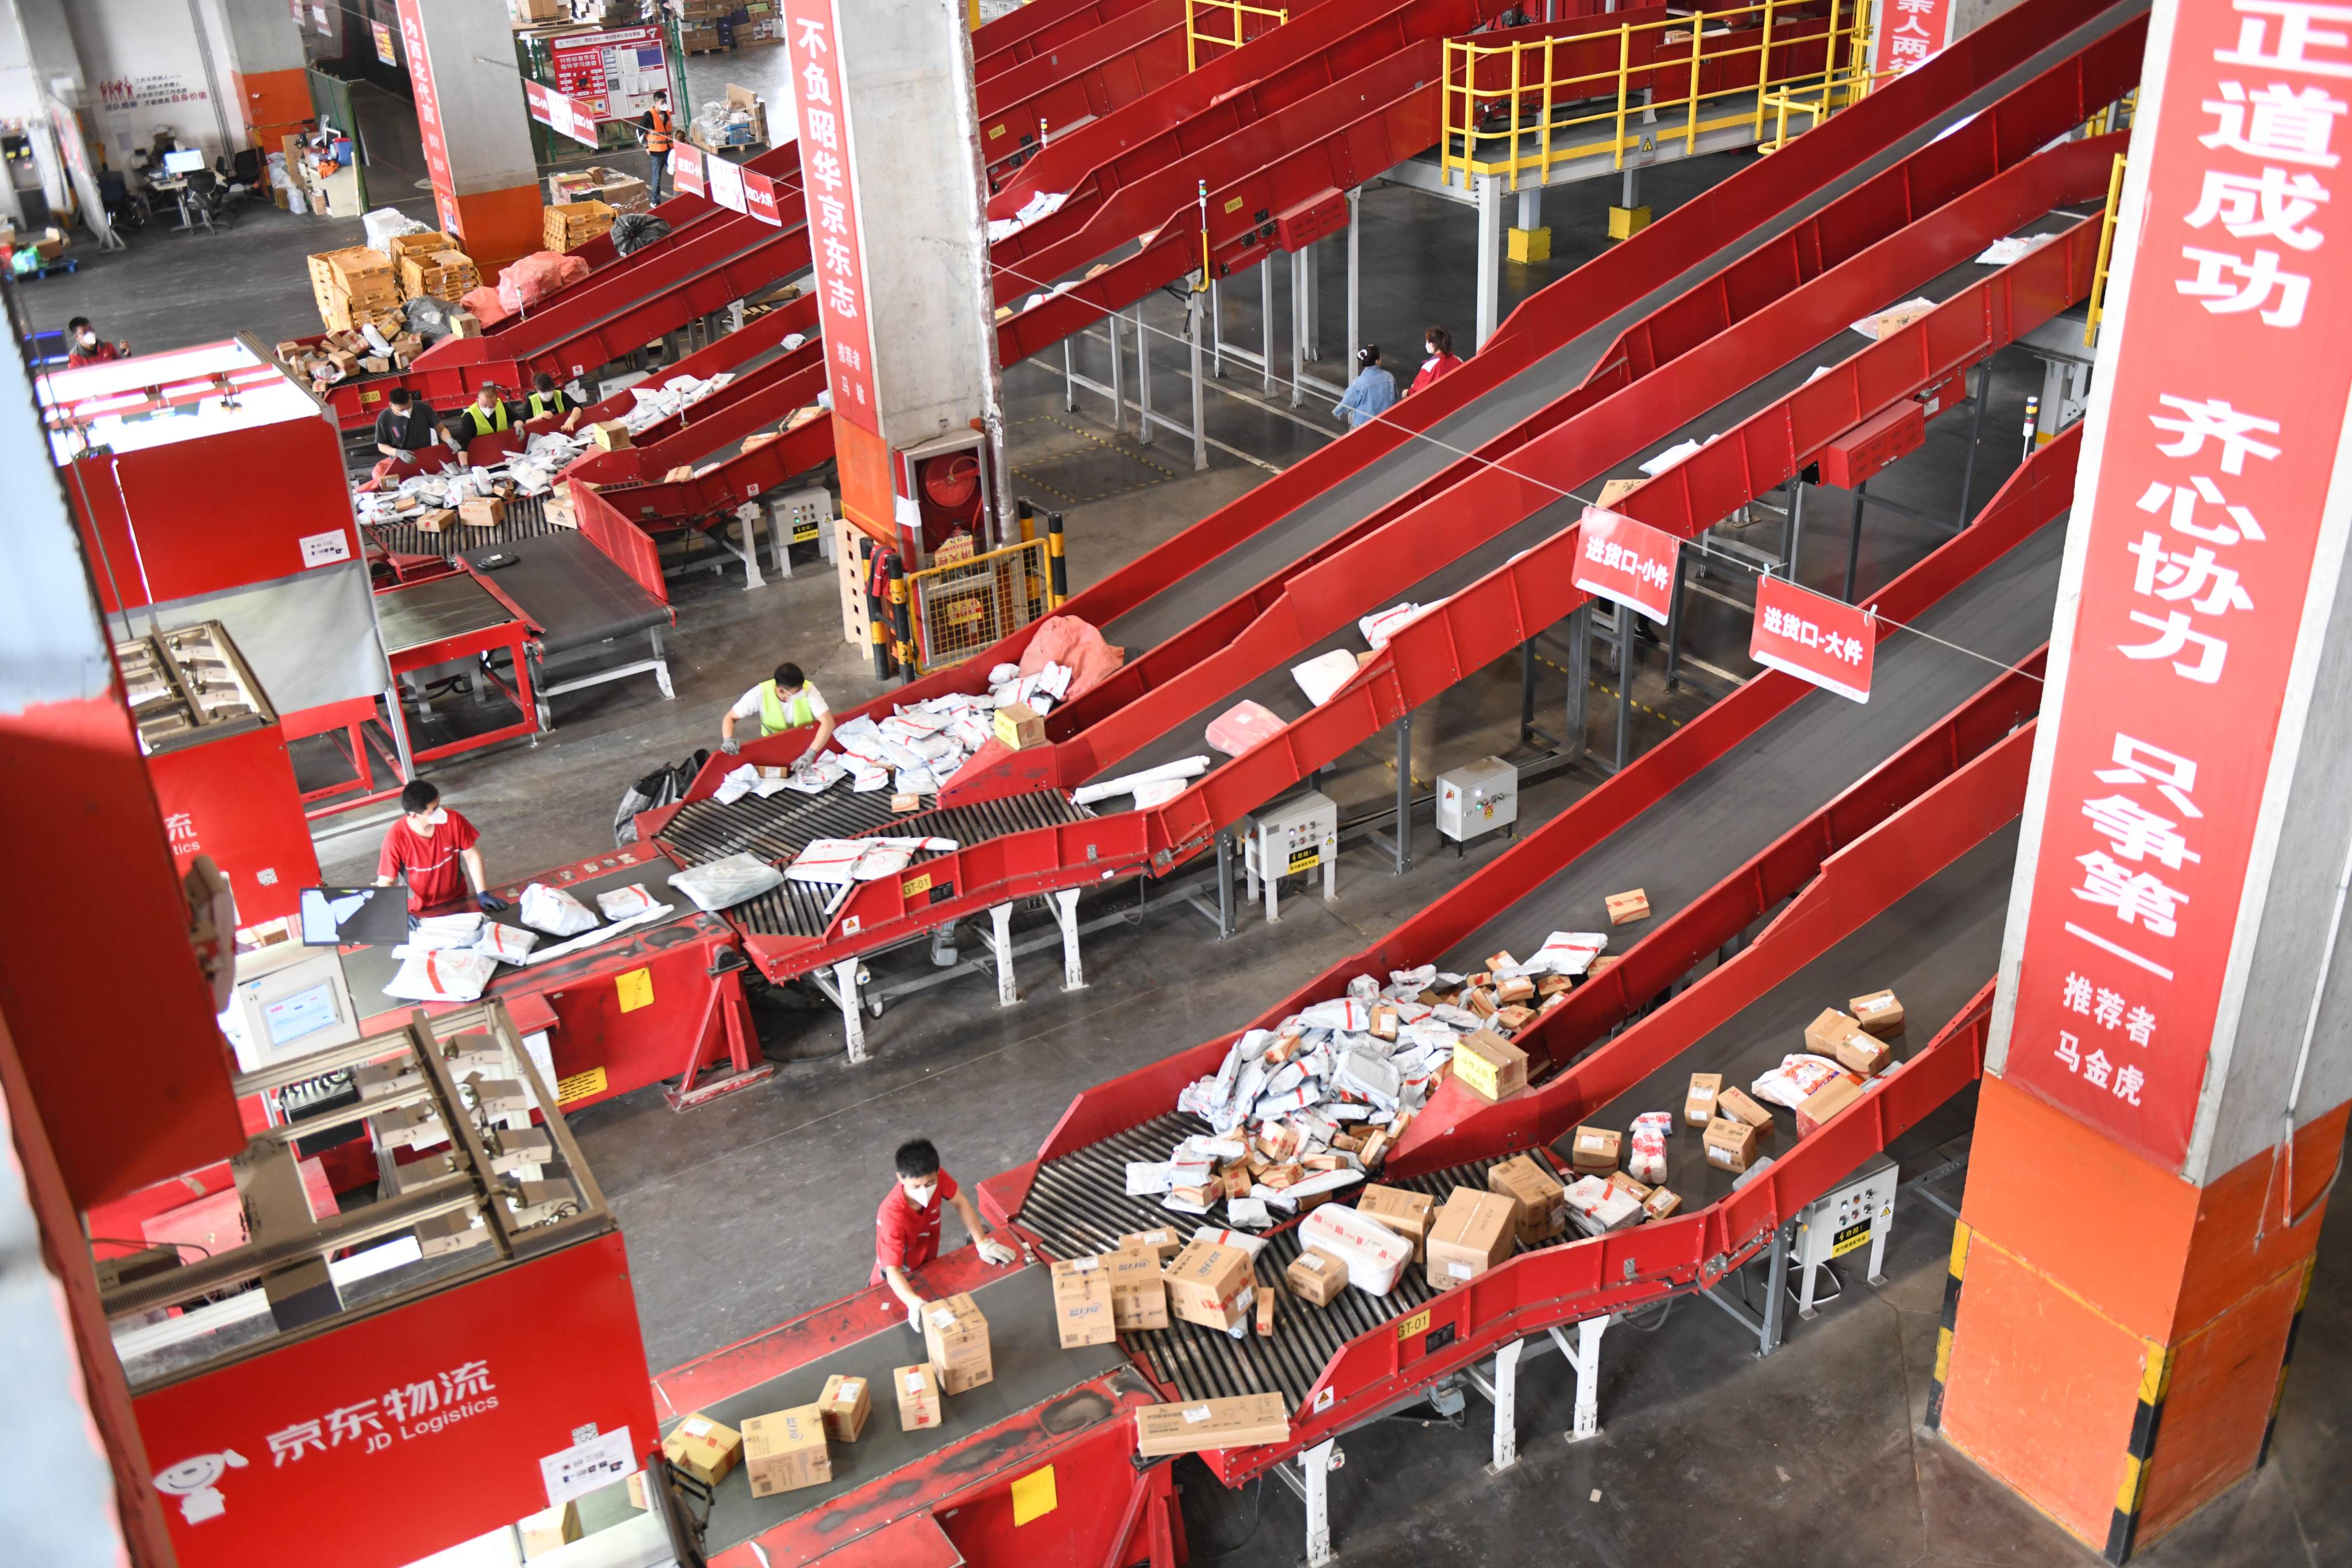 Employees sort parcels at JD.com’s intelligent logistics industrial park in Xian, Shaanxi province of China. Photo: VCG/VCG via Getty Images